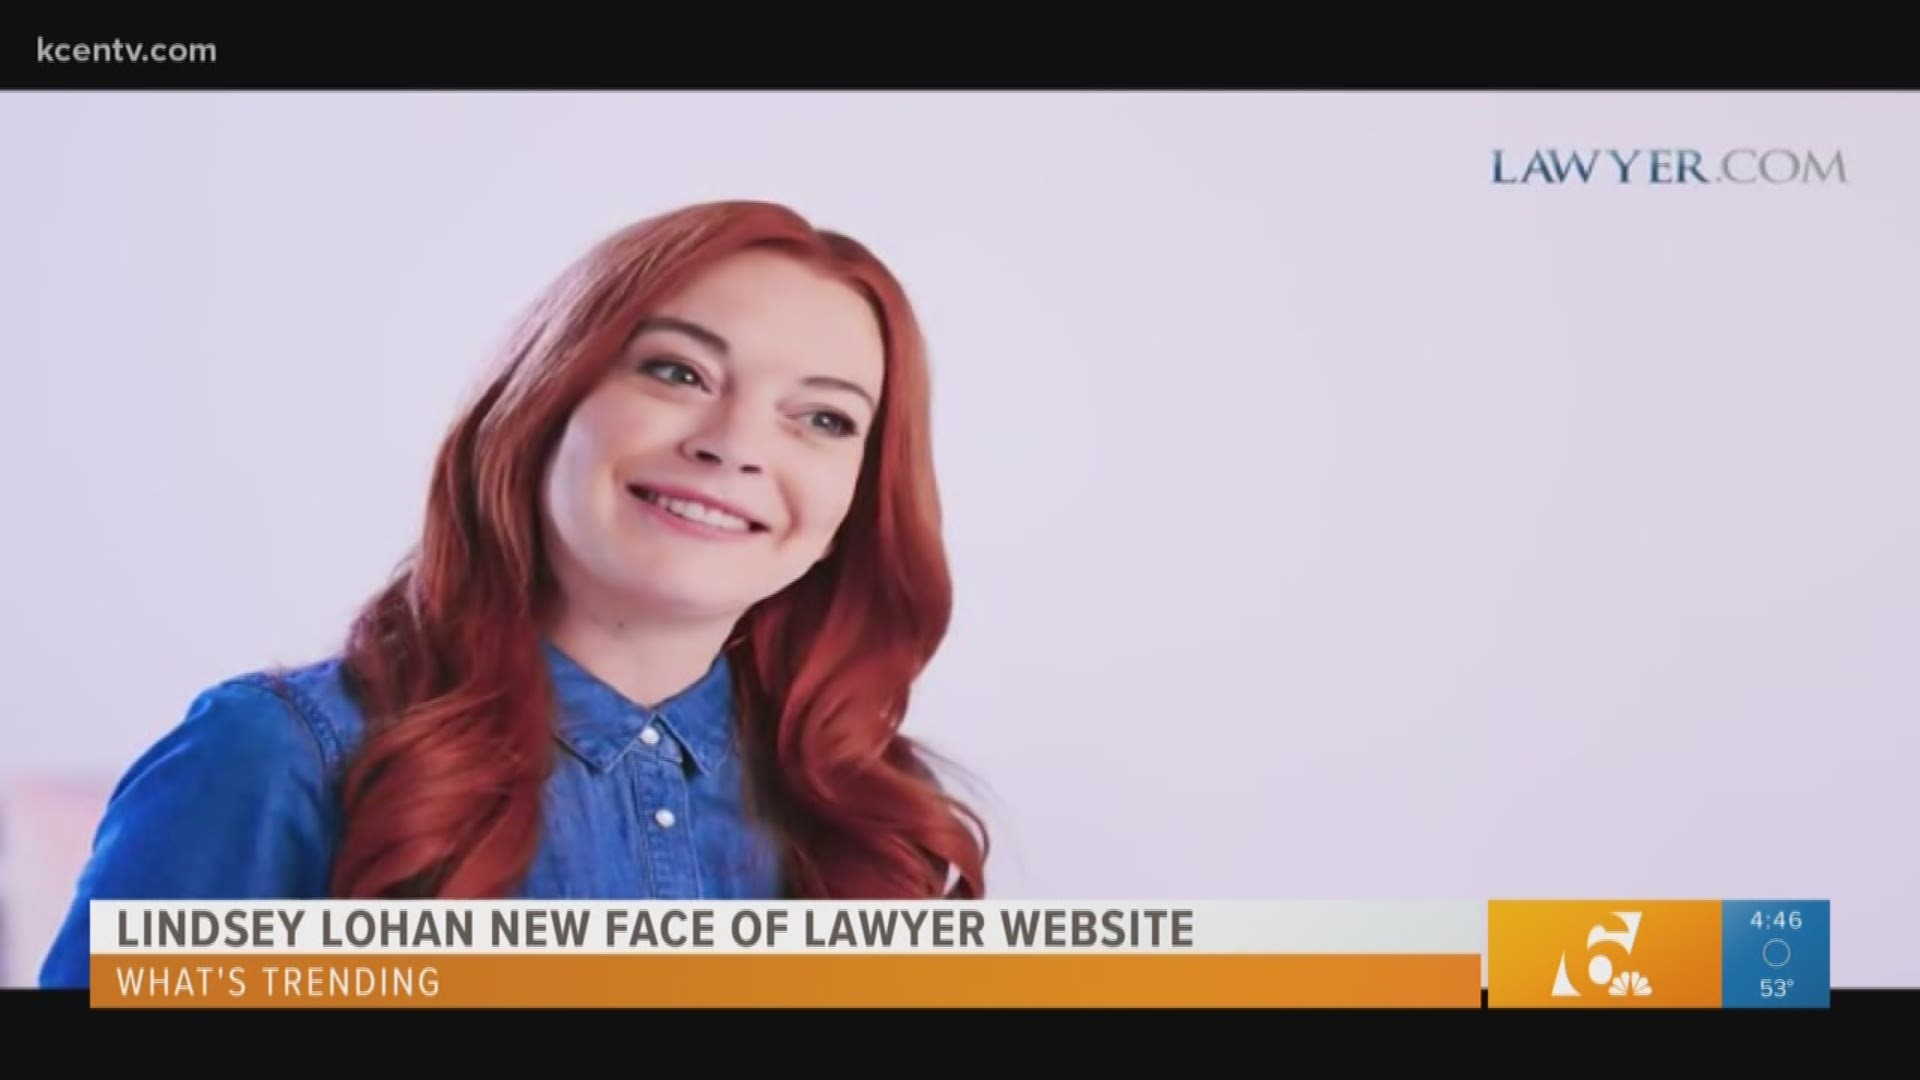 Movie about Prince Harry and Meghan Markle, Lindsey Lohan is the face of a new lawyer website, Trump and Biden disagree